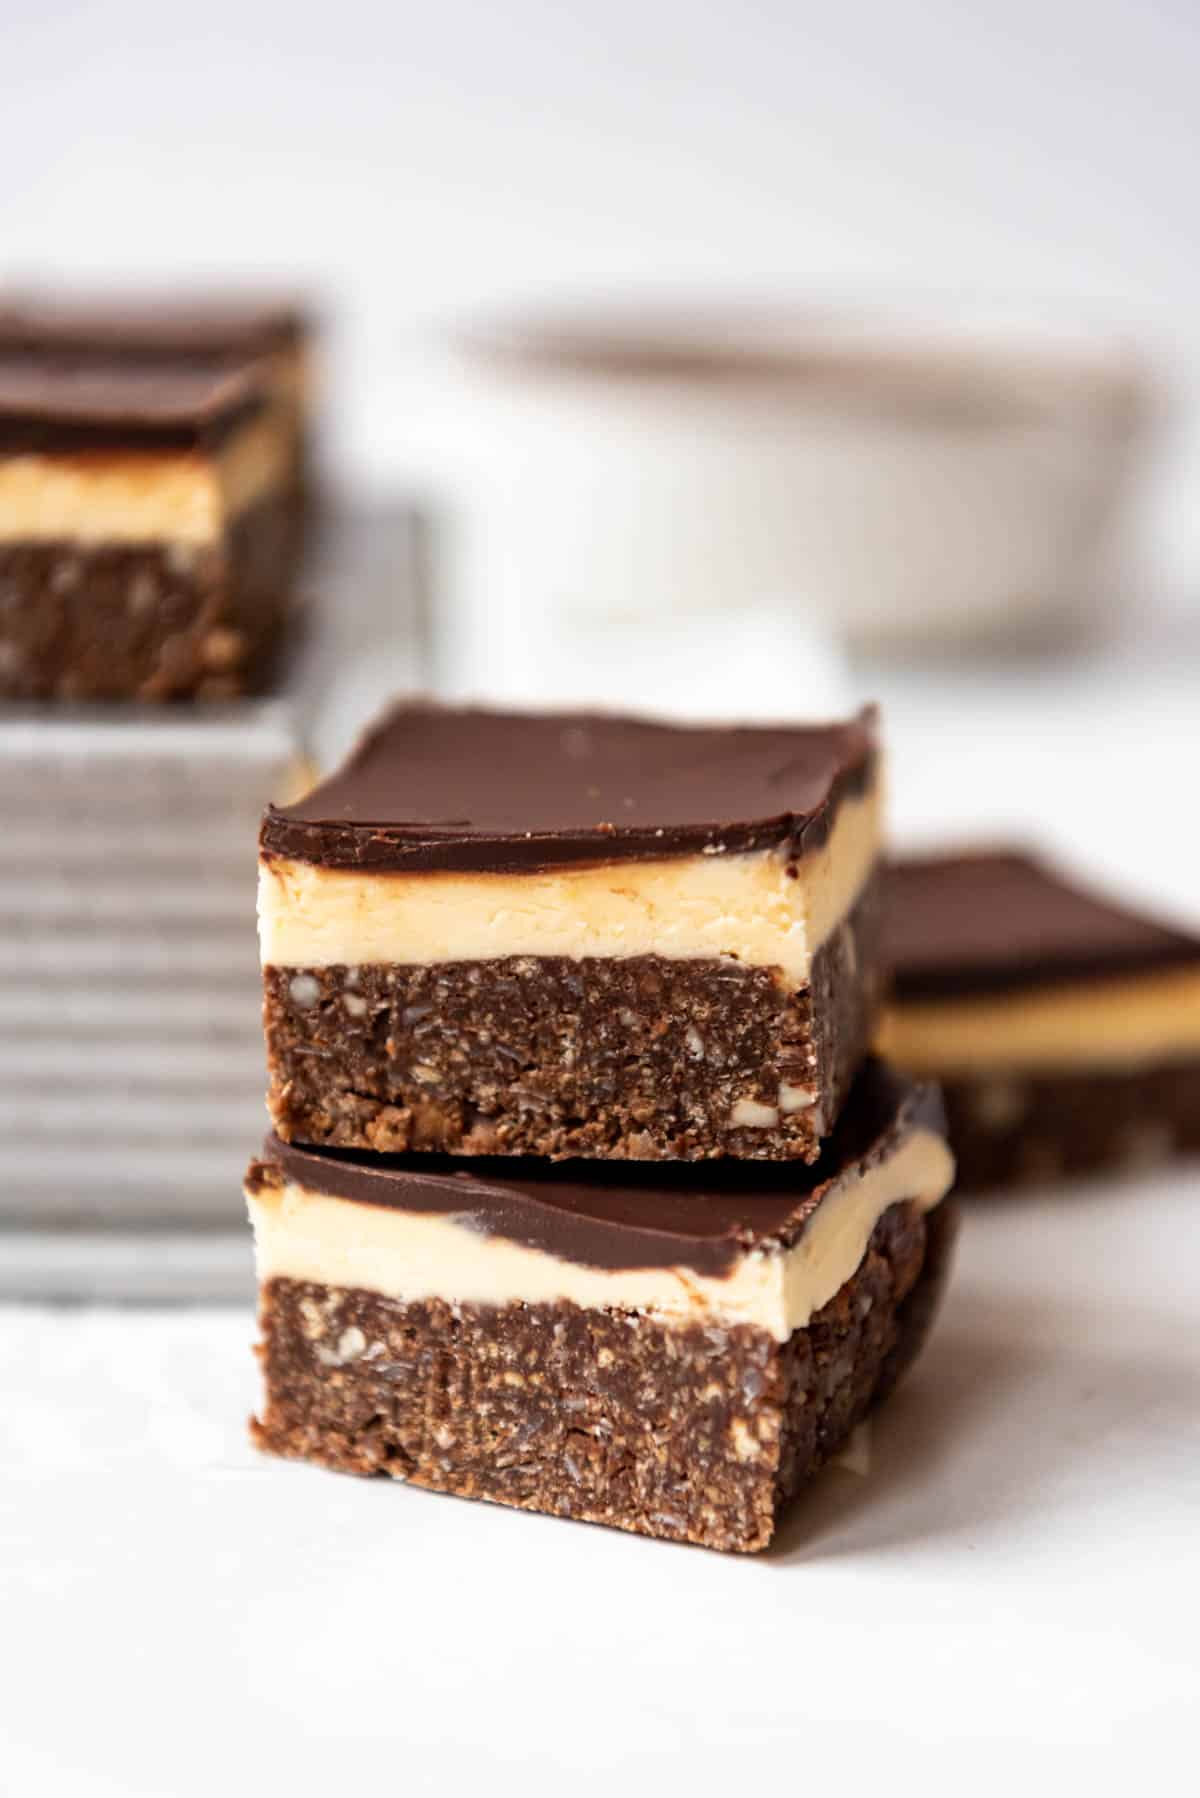 Two nanaimo bars stacked on each other.